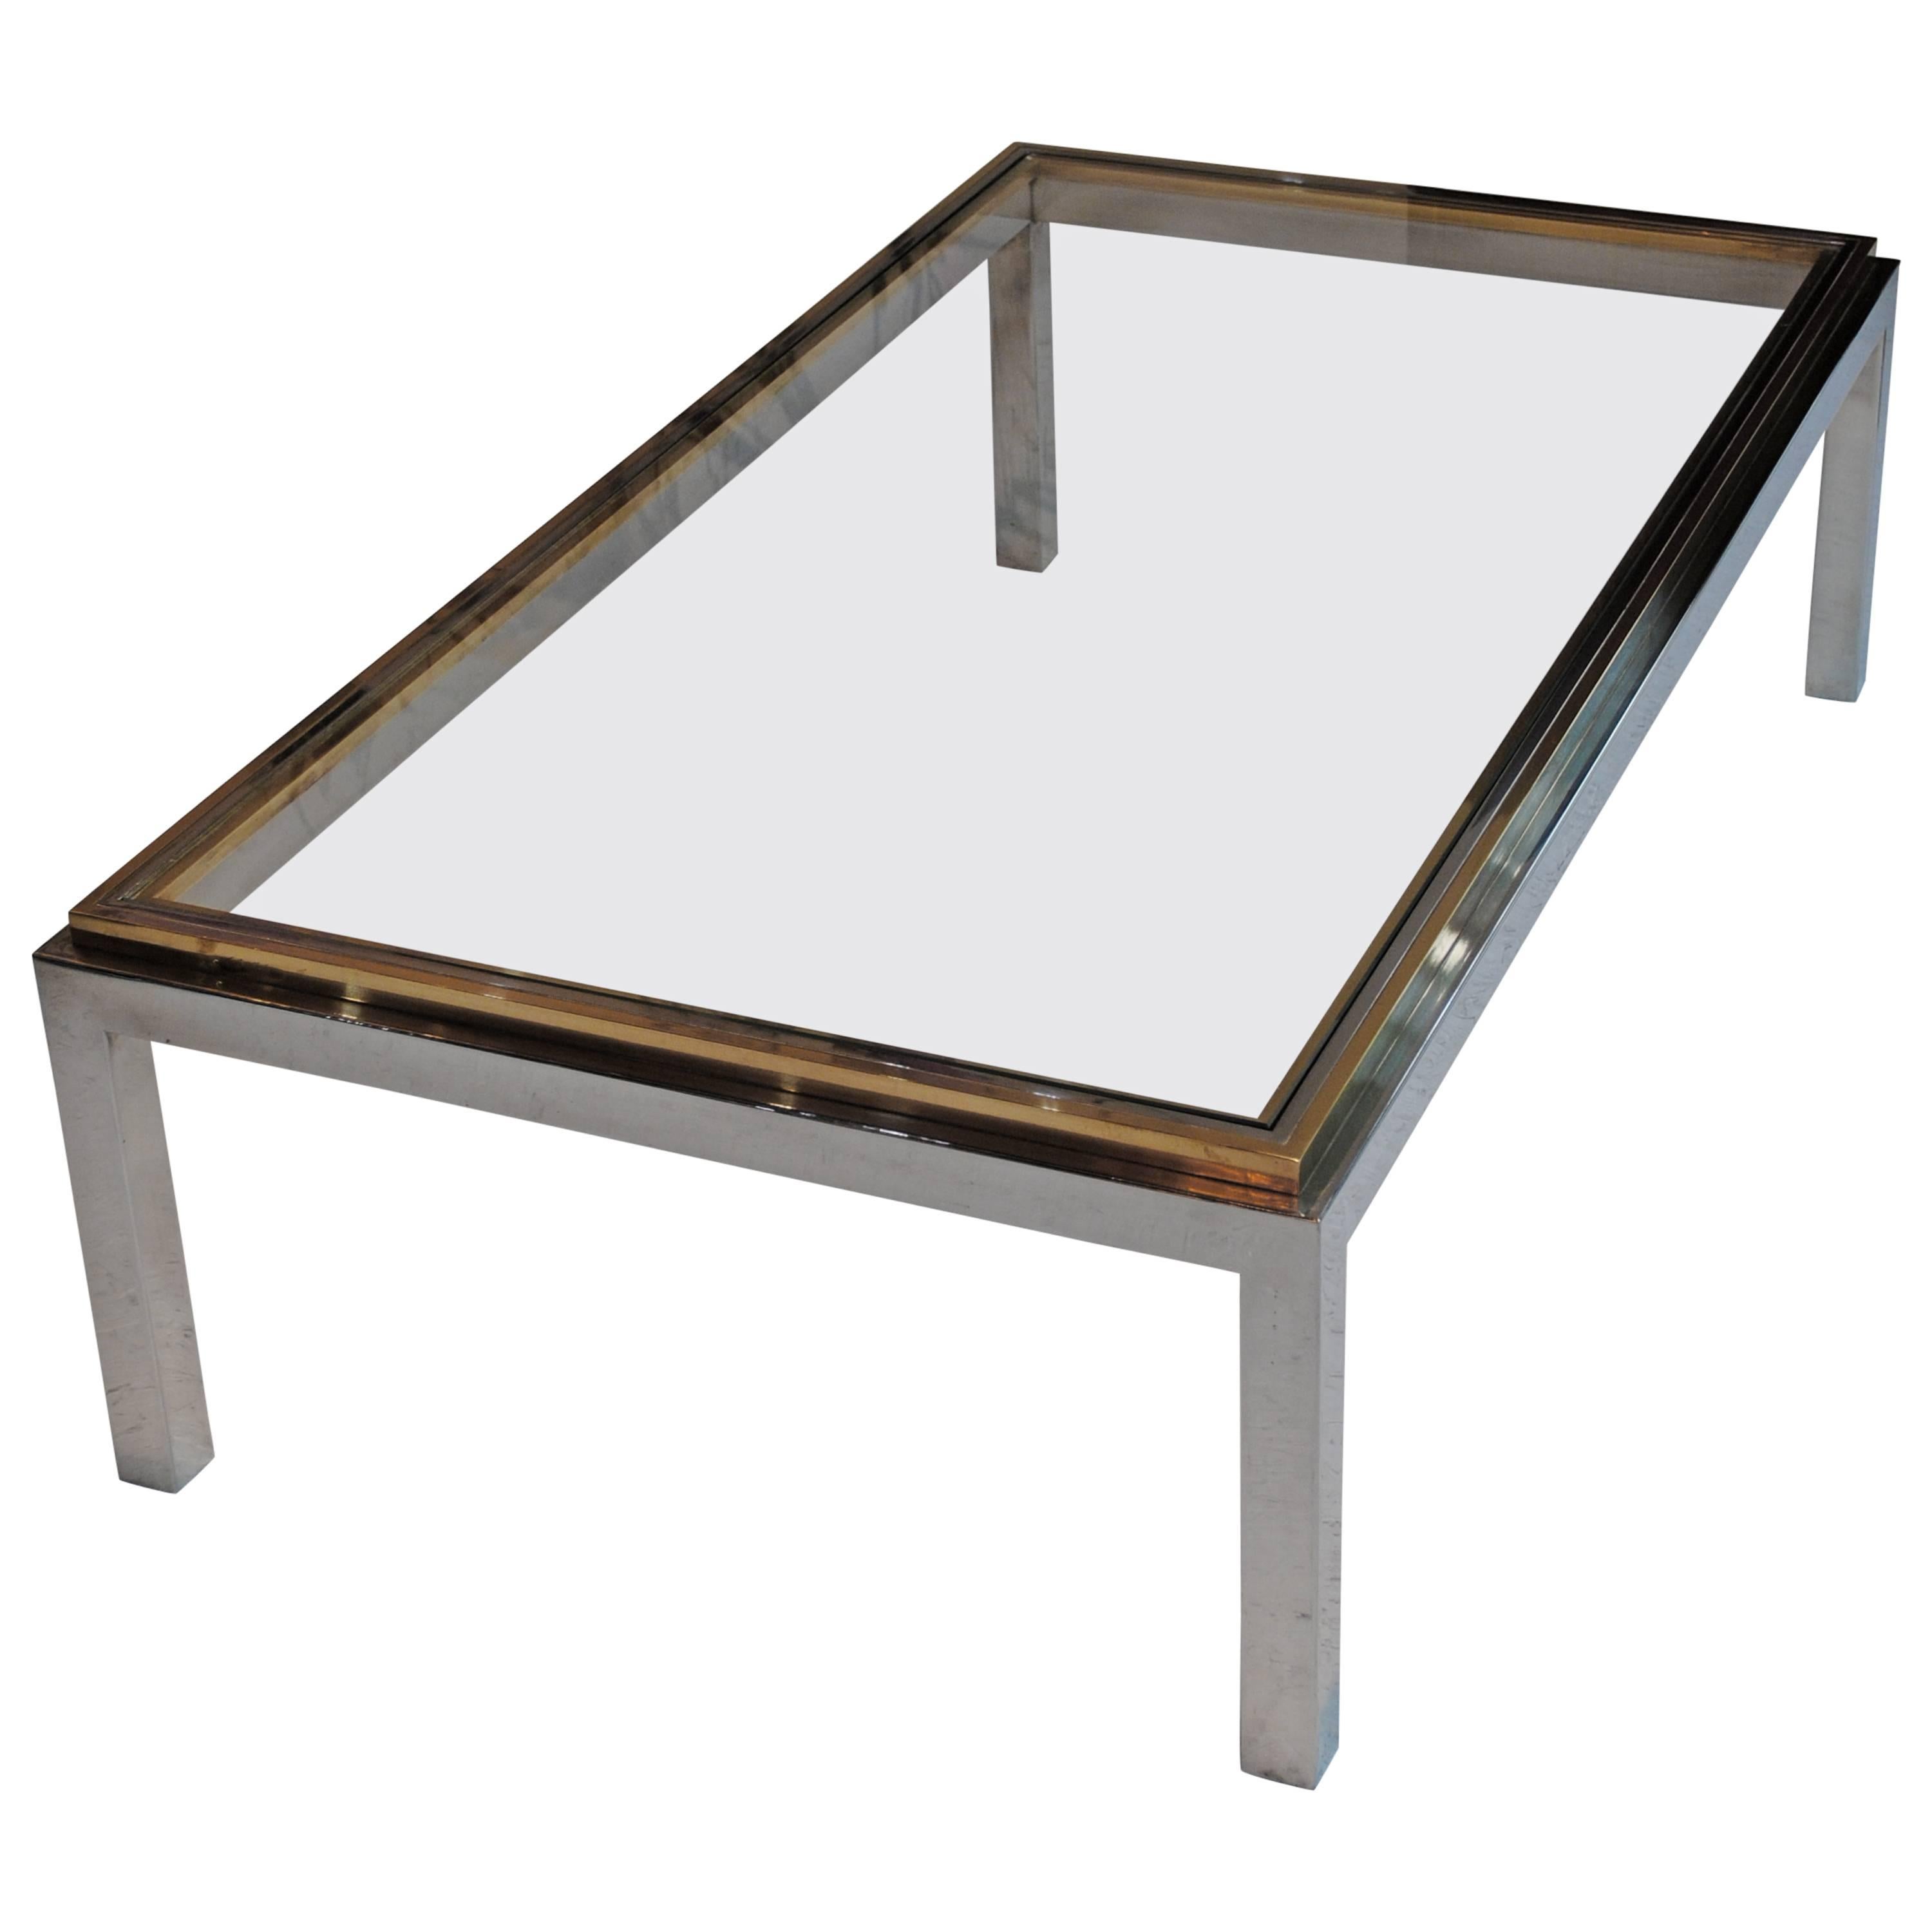 'Flaminia' Coffee Table by Willy Rizzo For Sale